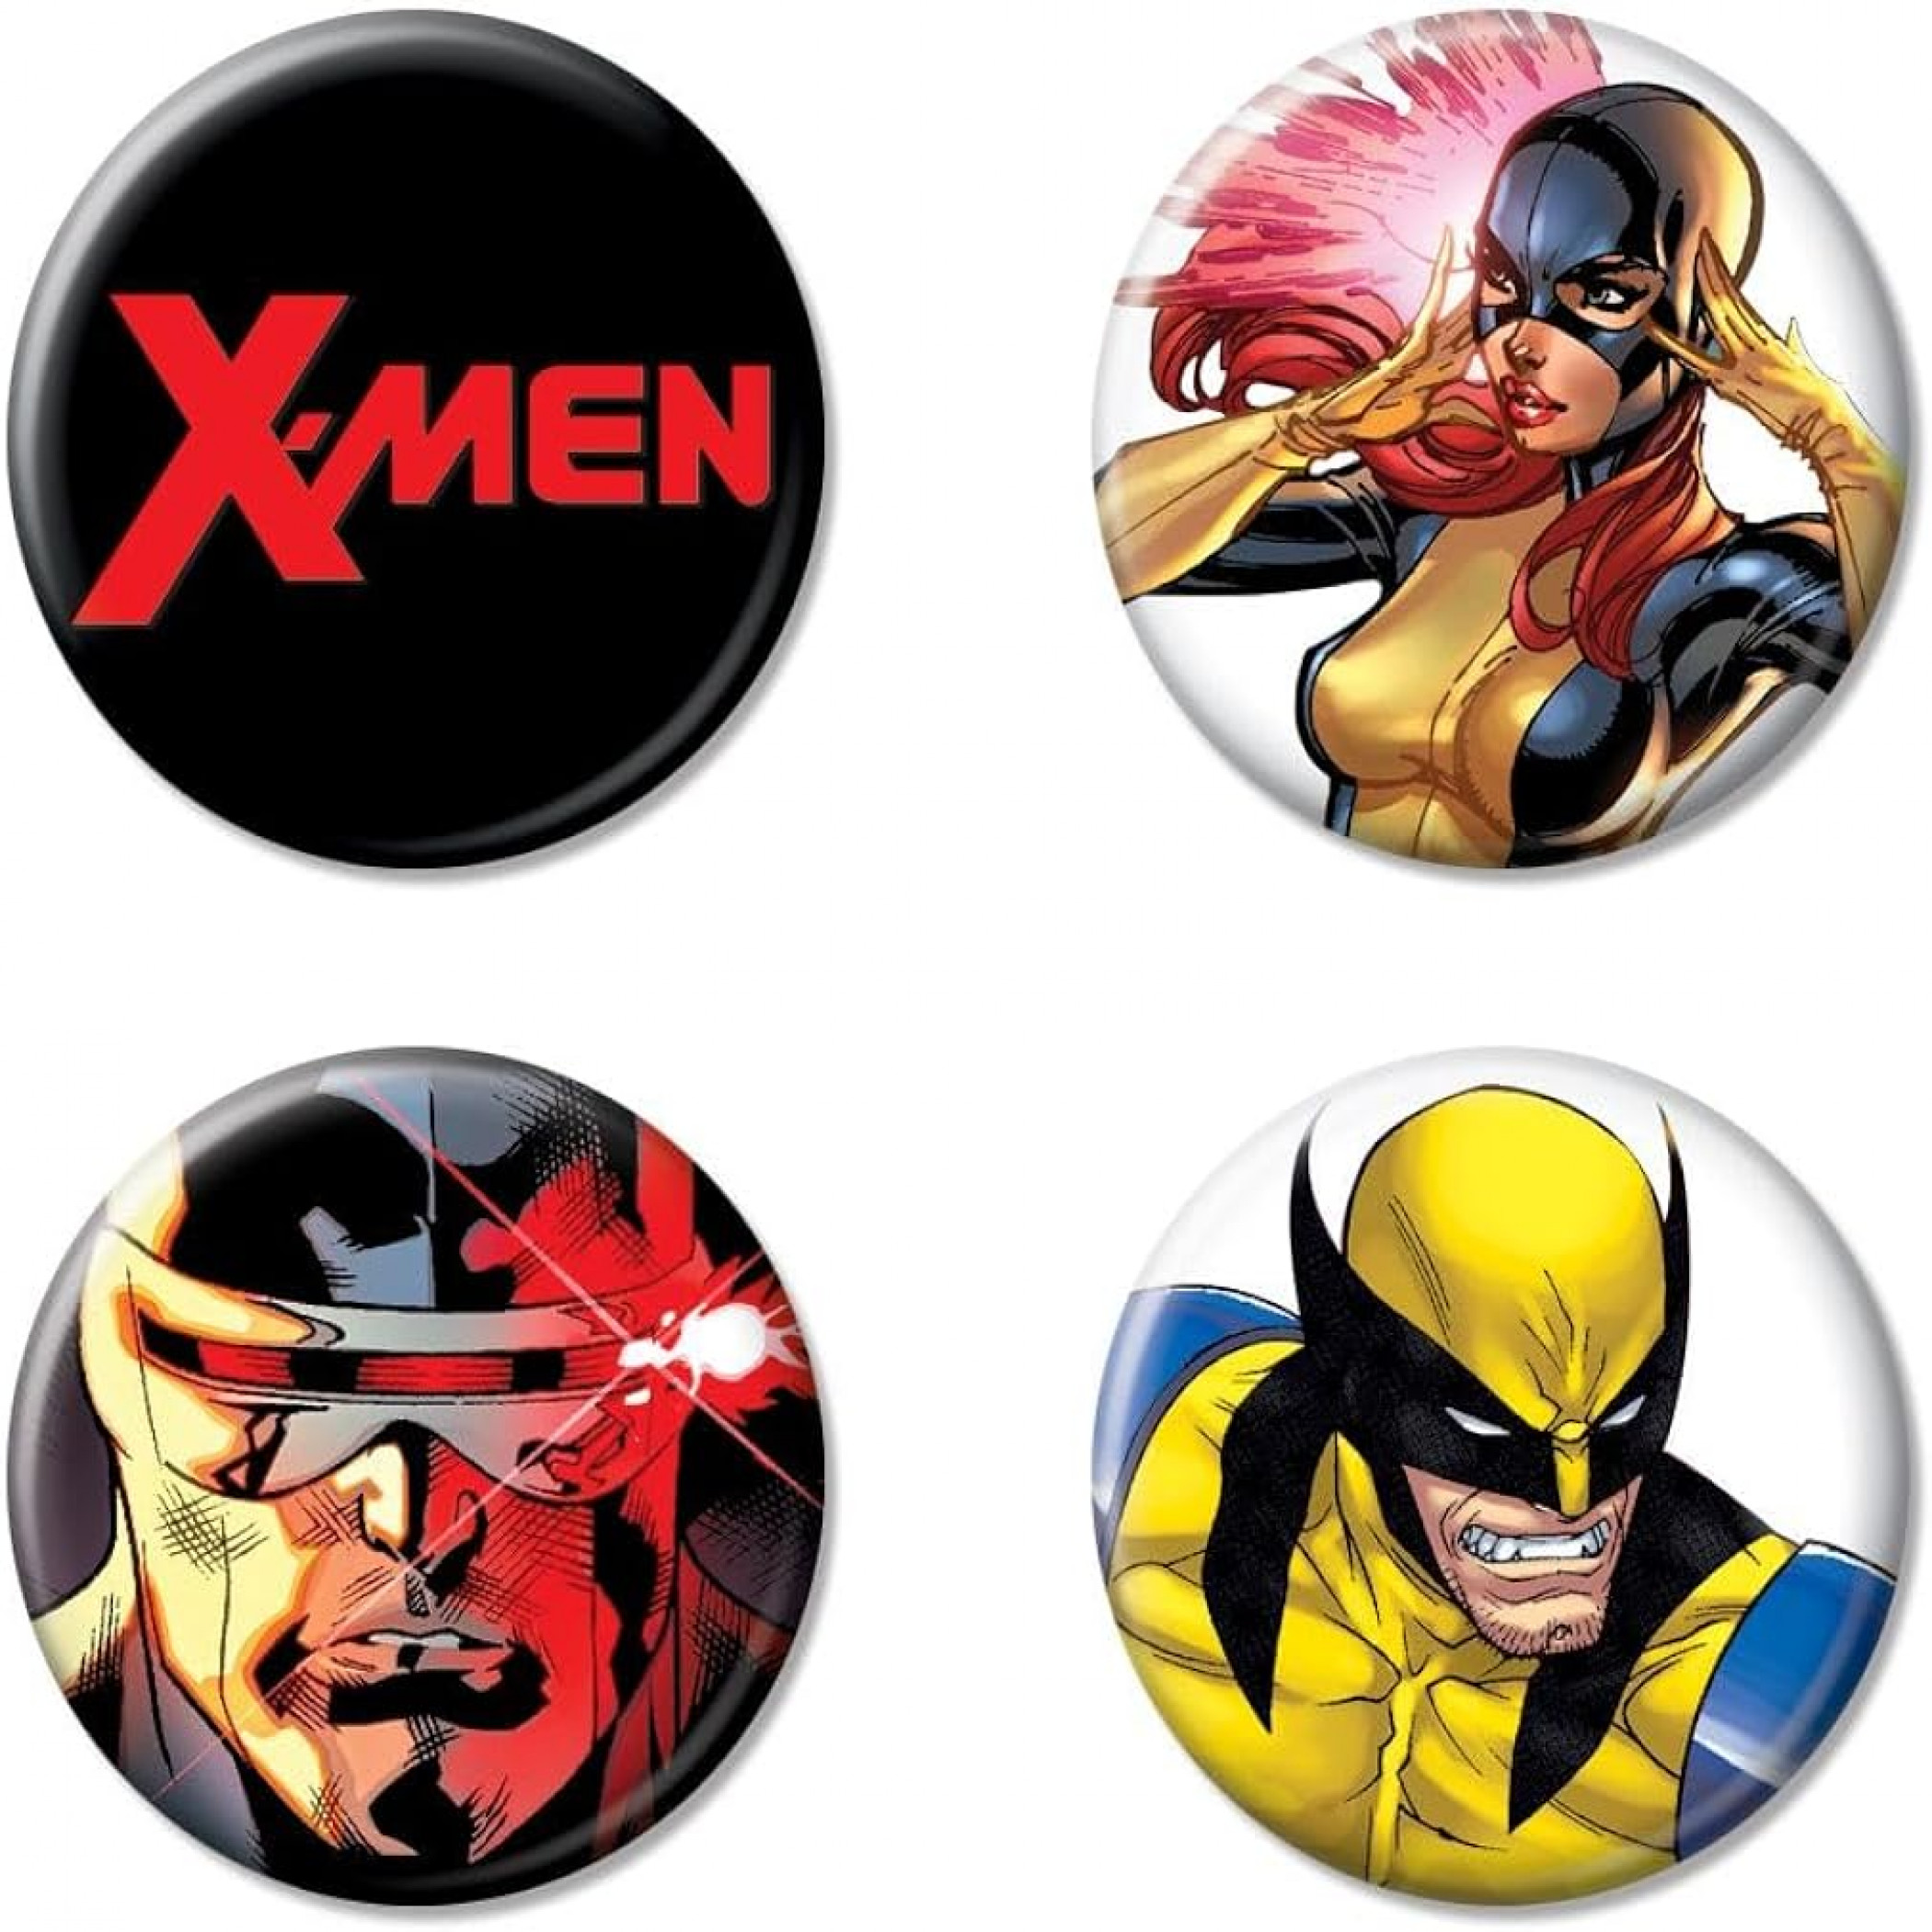 X-Men Jean Grey Cyclops and Wolverine 4-Pack Button Set